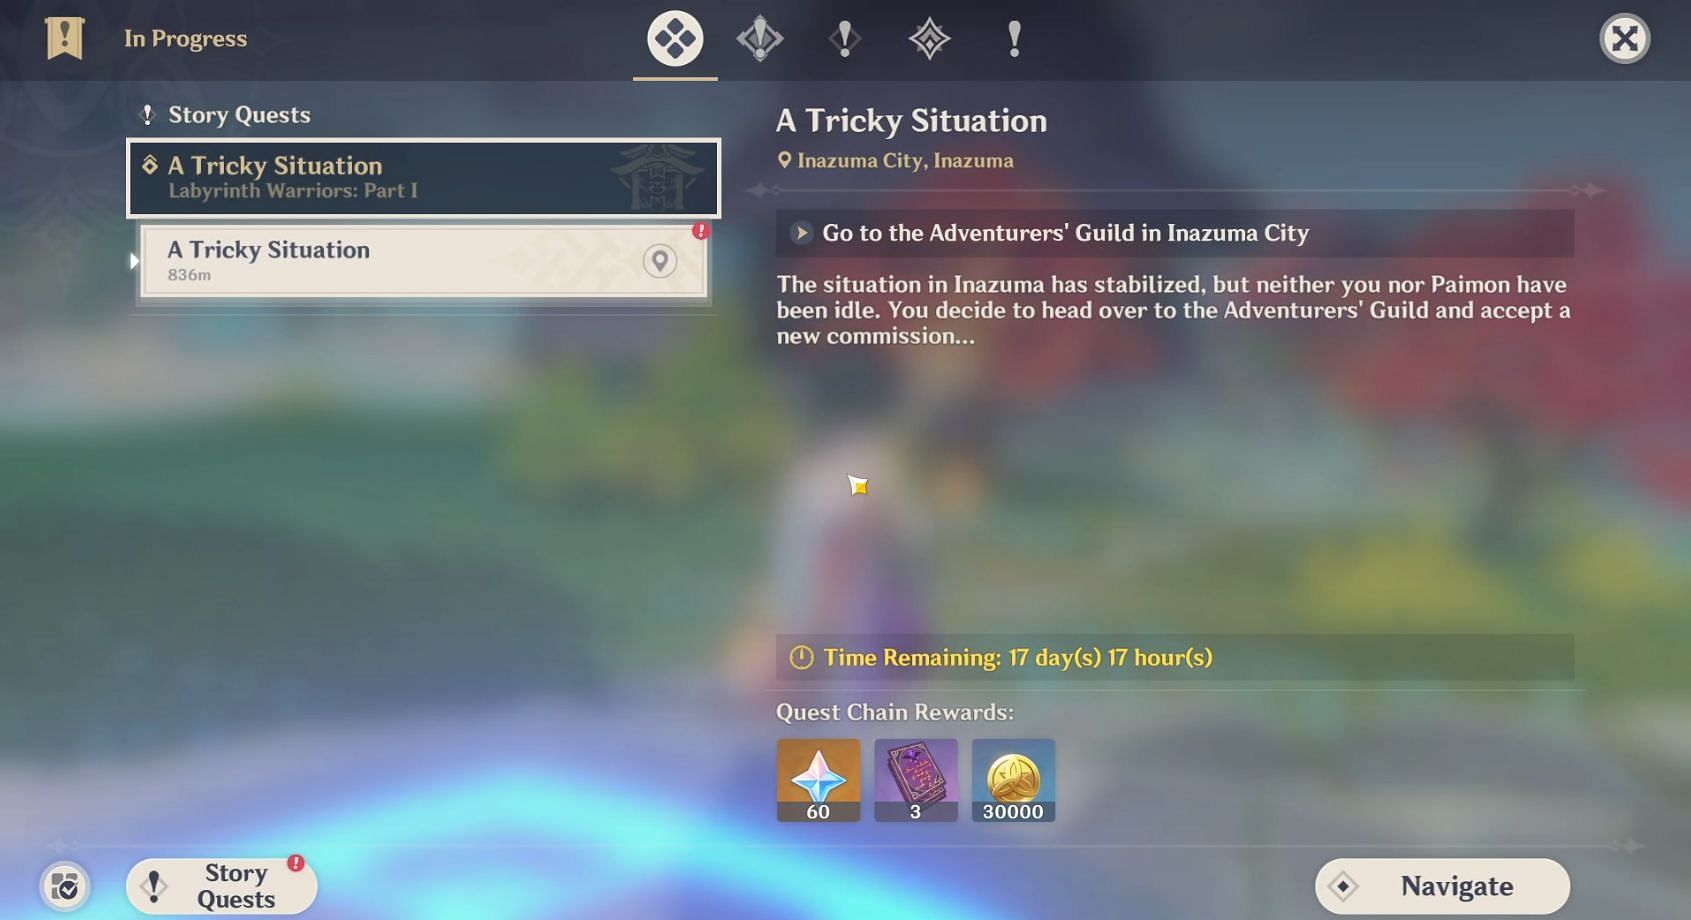 A Tricky Situation quest (Image via Genshin Impact)